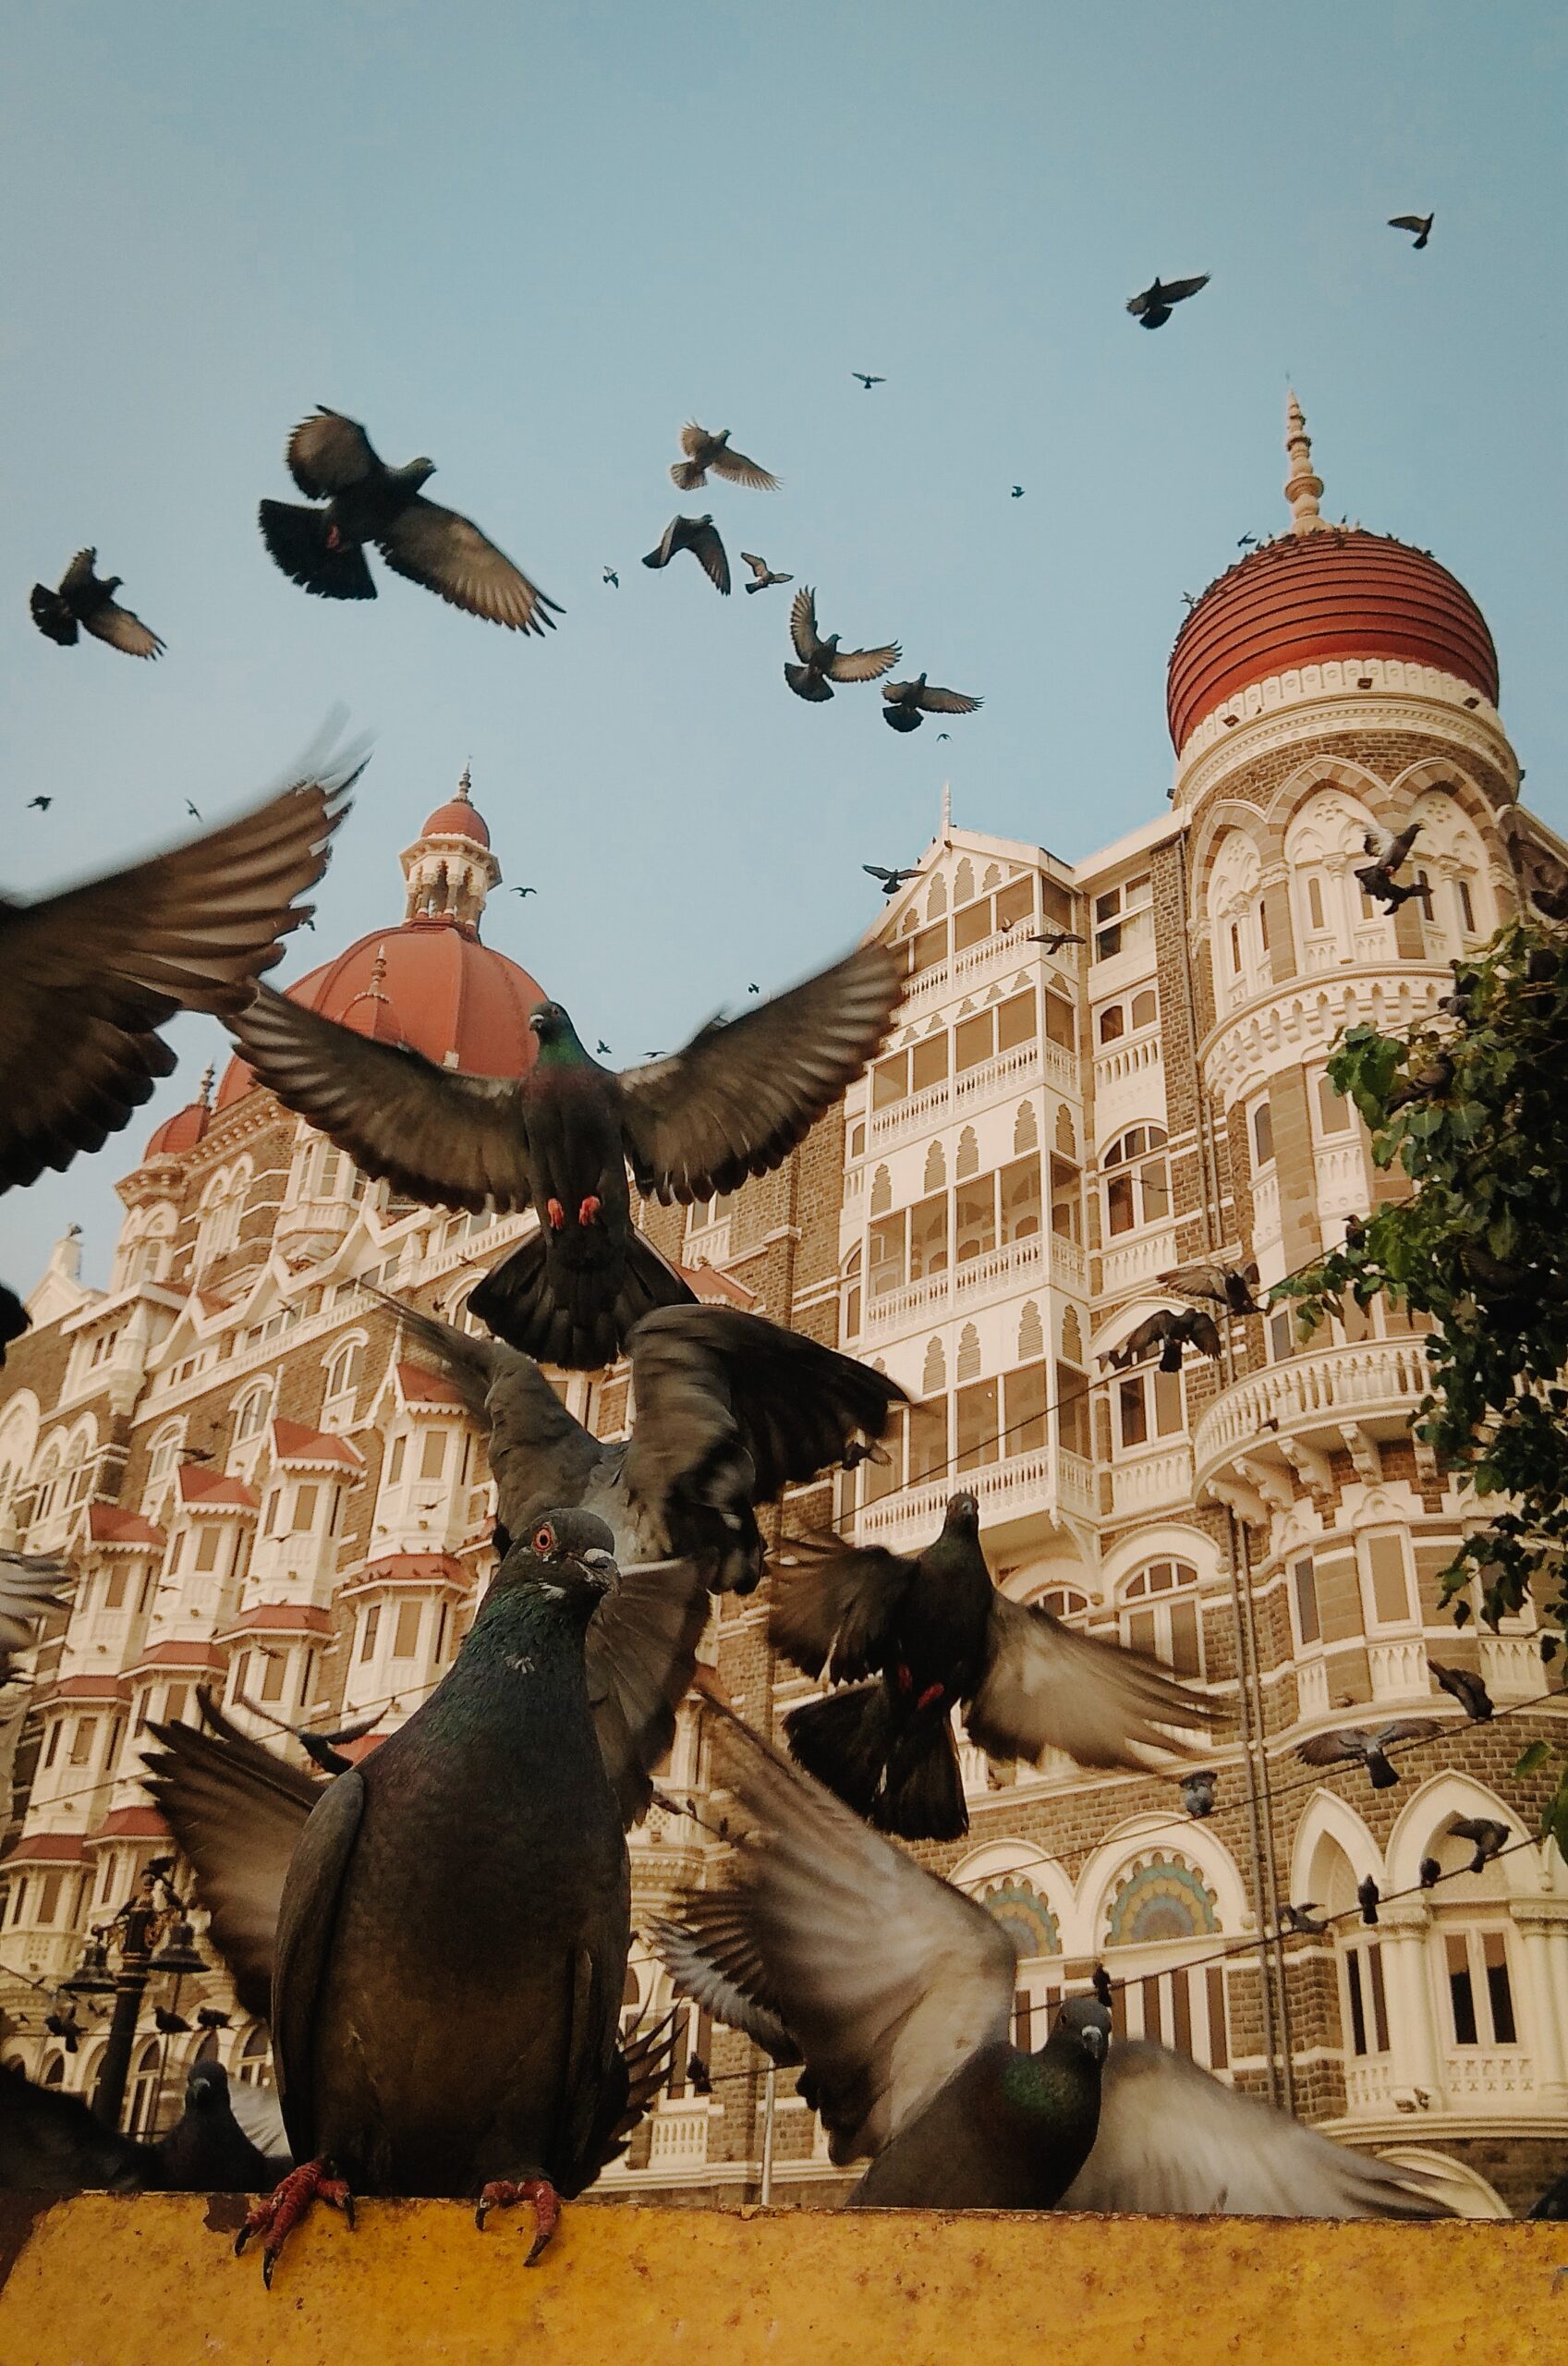 A flock of pigeons soar into a clear blue sky. An ornate white building is in the background, topped by red domes.